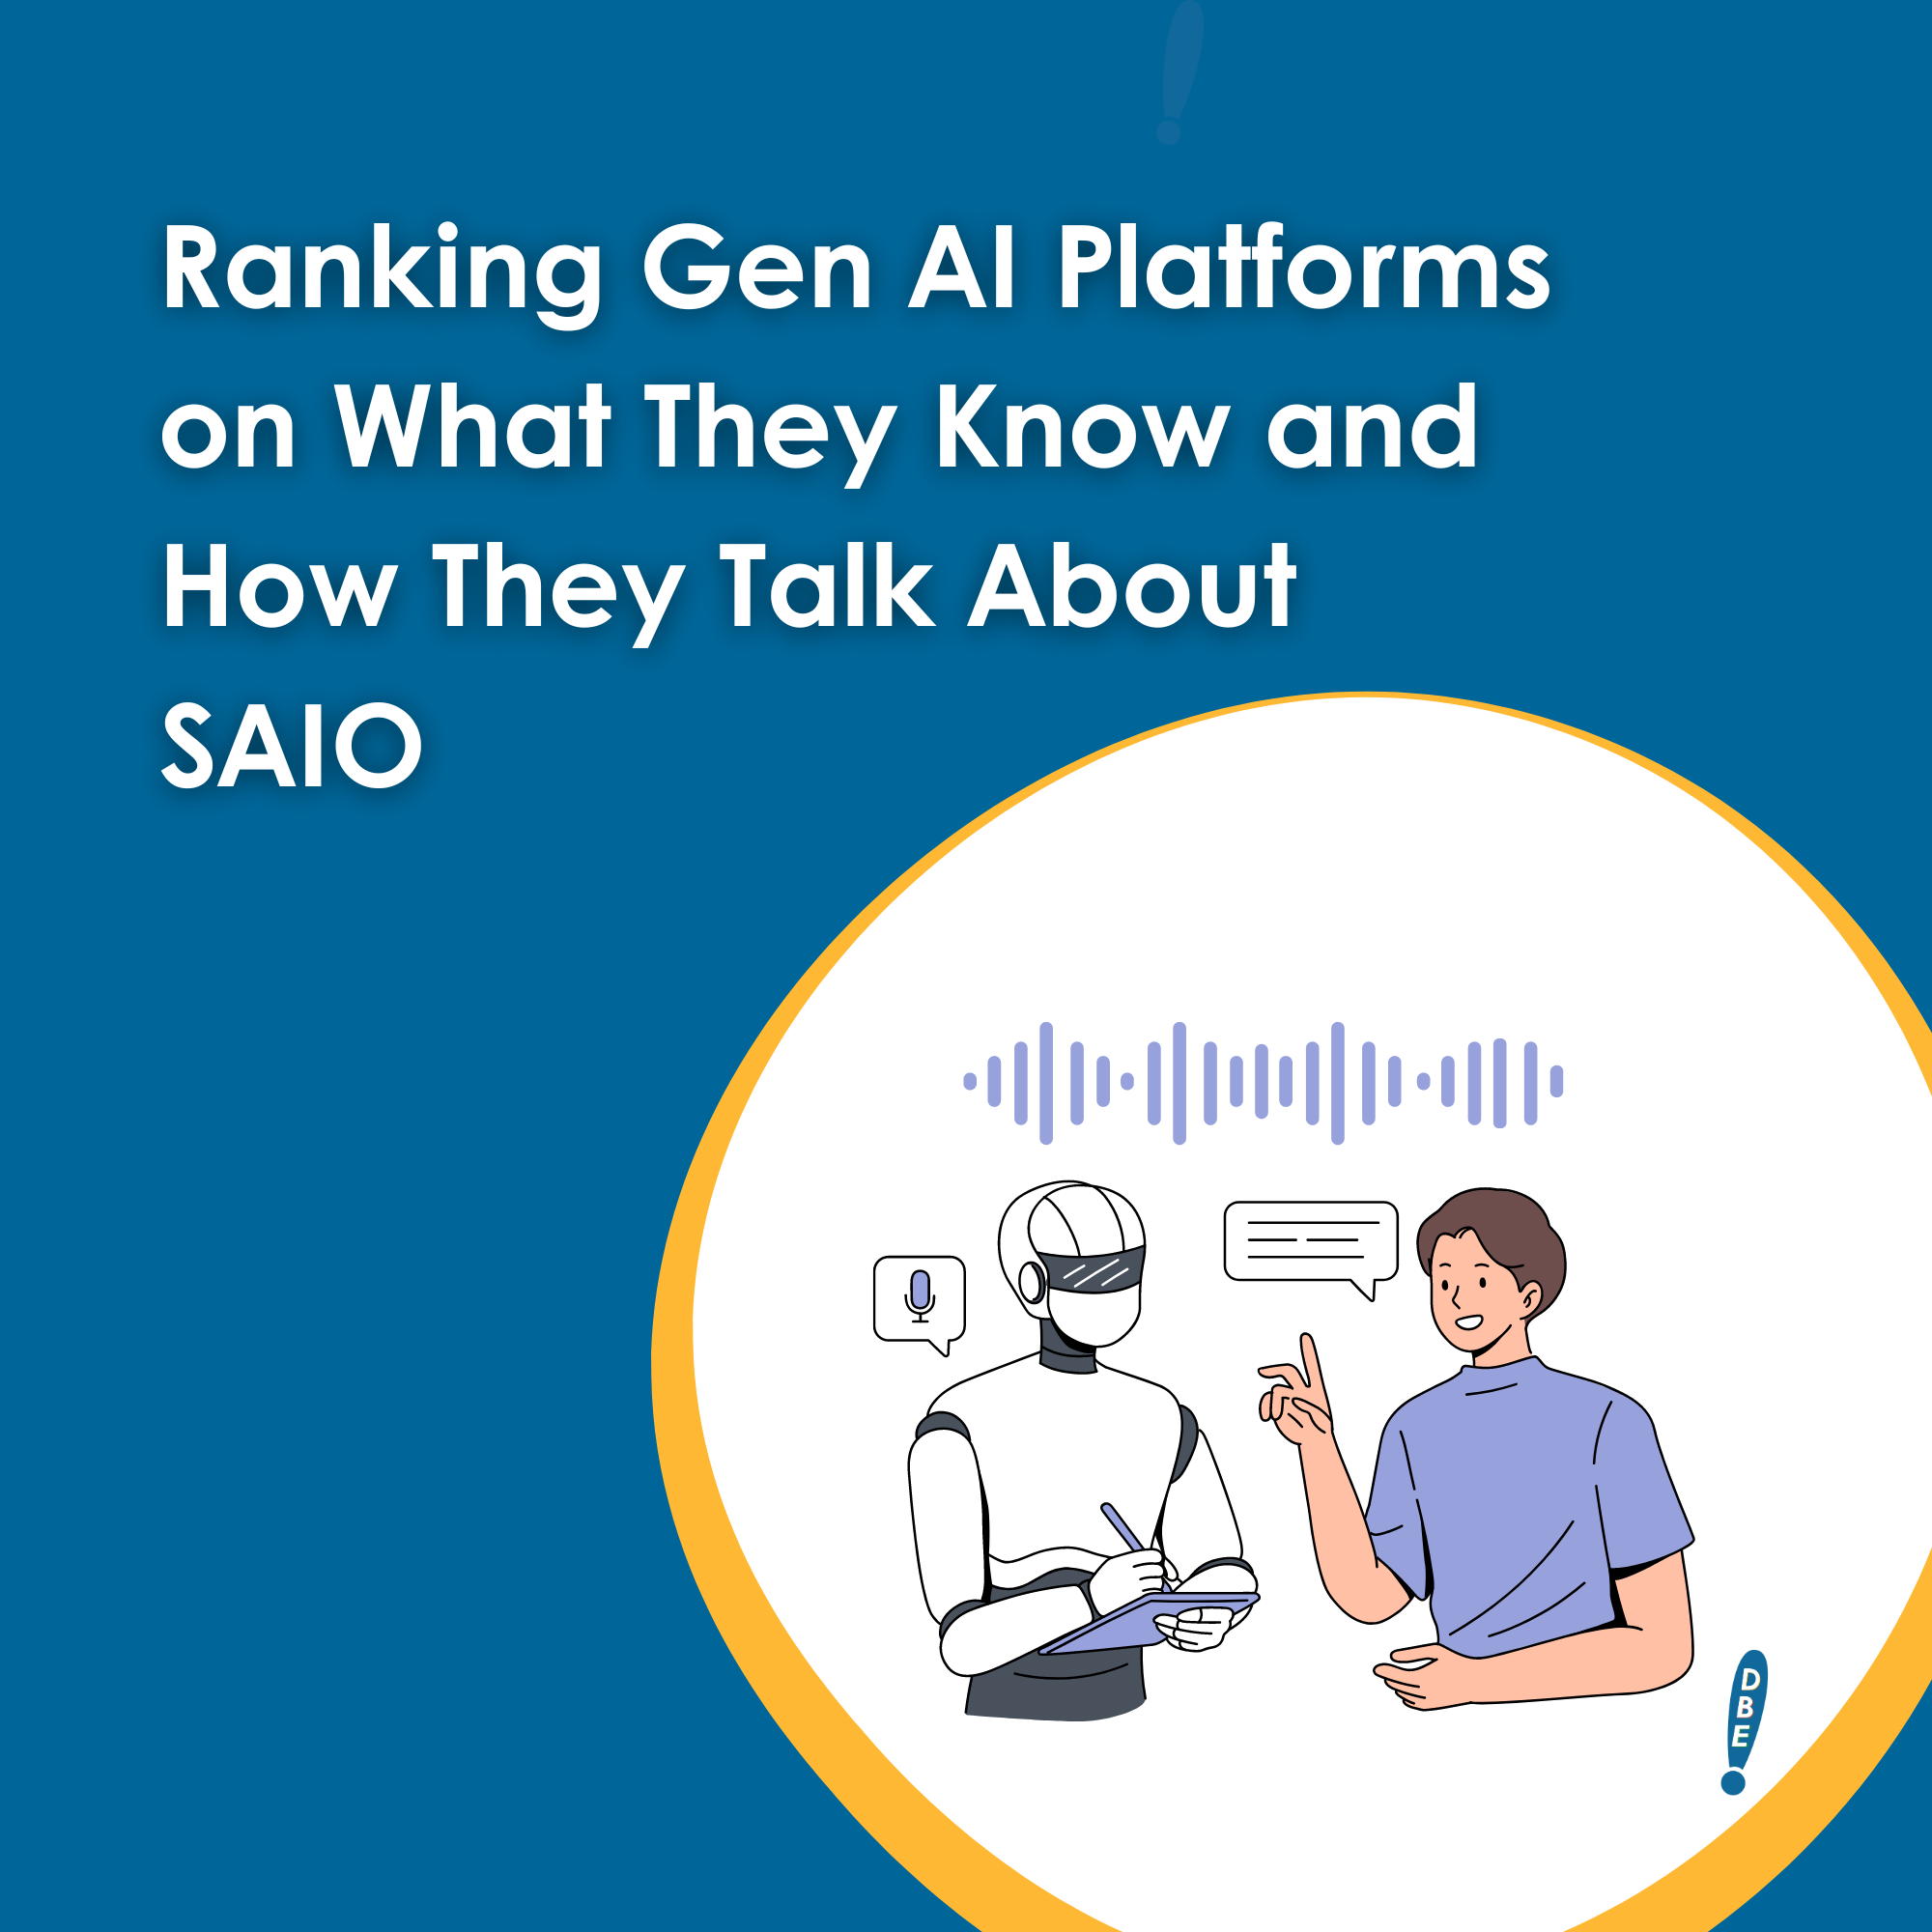 Ranking Gen AI Platforms on What They Know and How They Talk About SAIO At the bottom of picture there is a person talking to a robot taking notes